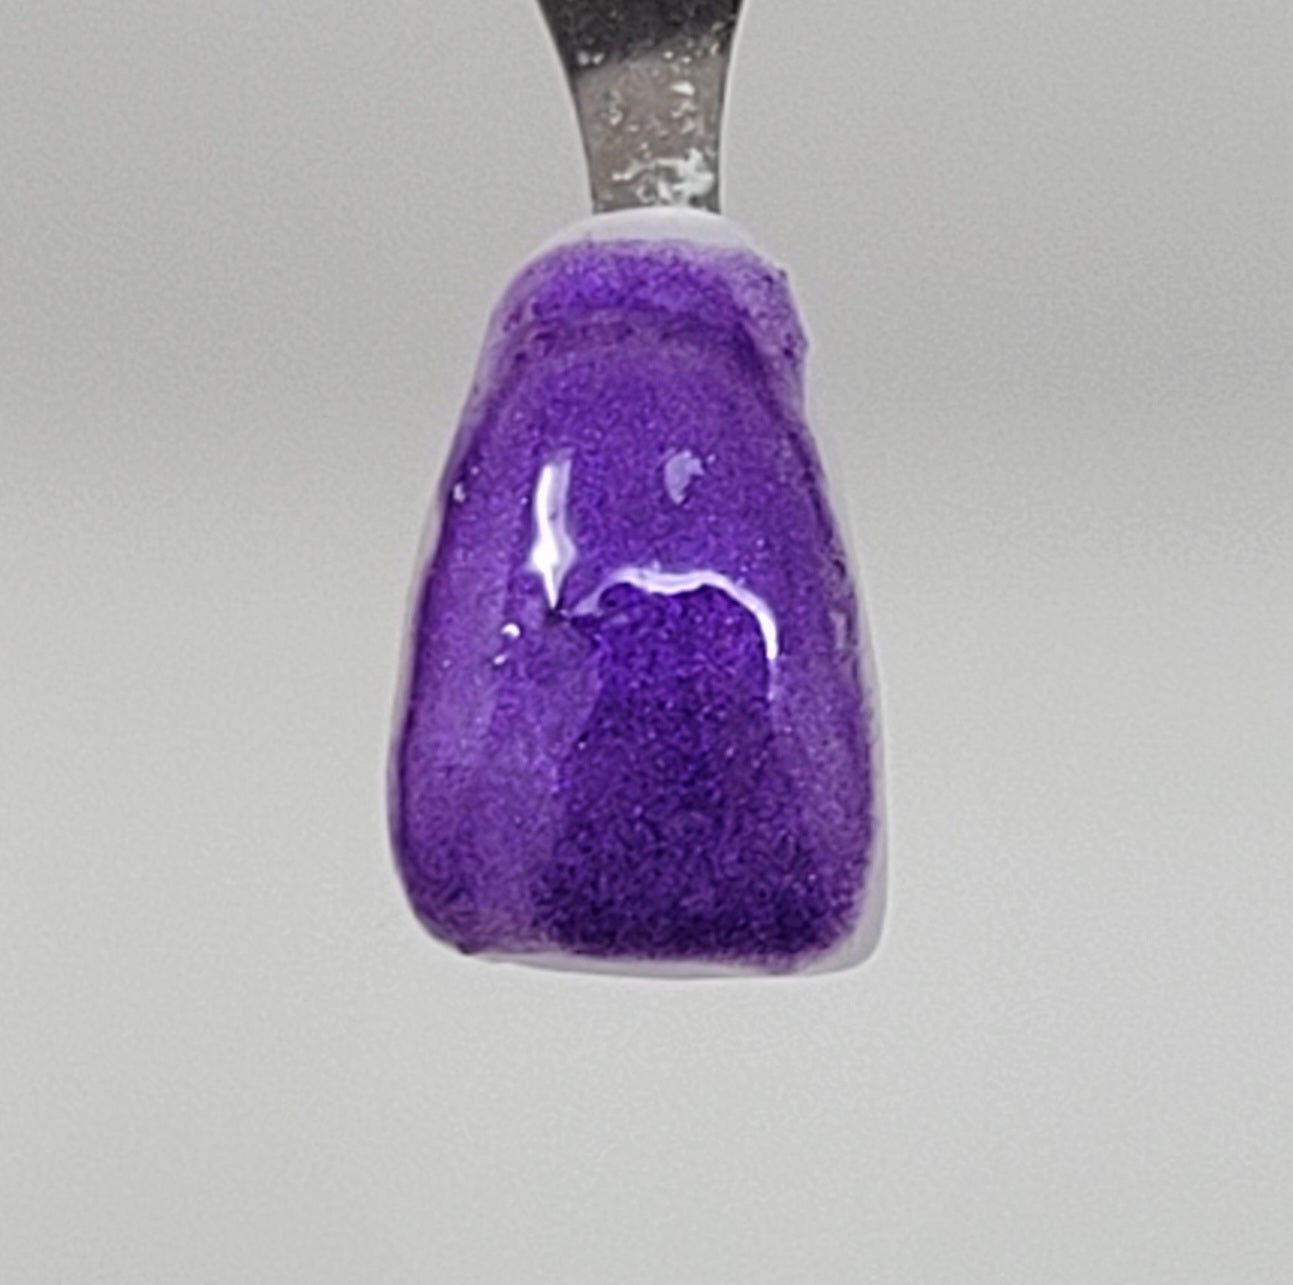 Deep Purple Temporary Tattooth Colorant on a demo tooth.  These colorants can be applied to teeth to temporarily alter their color or iridescence.